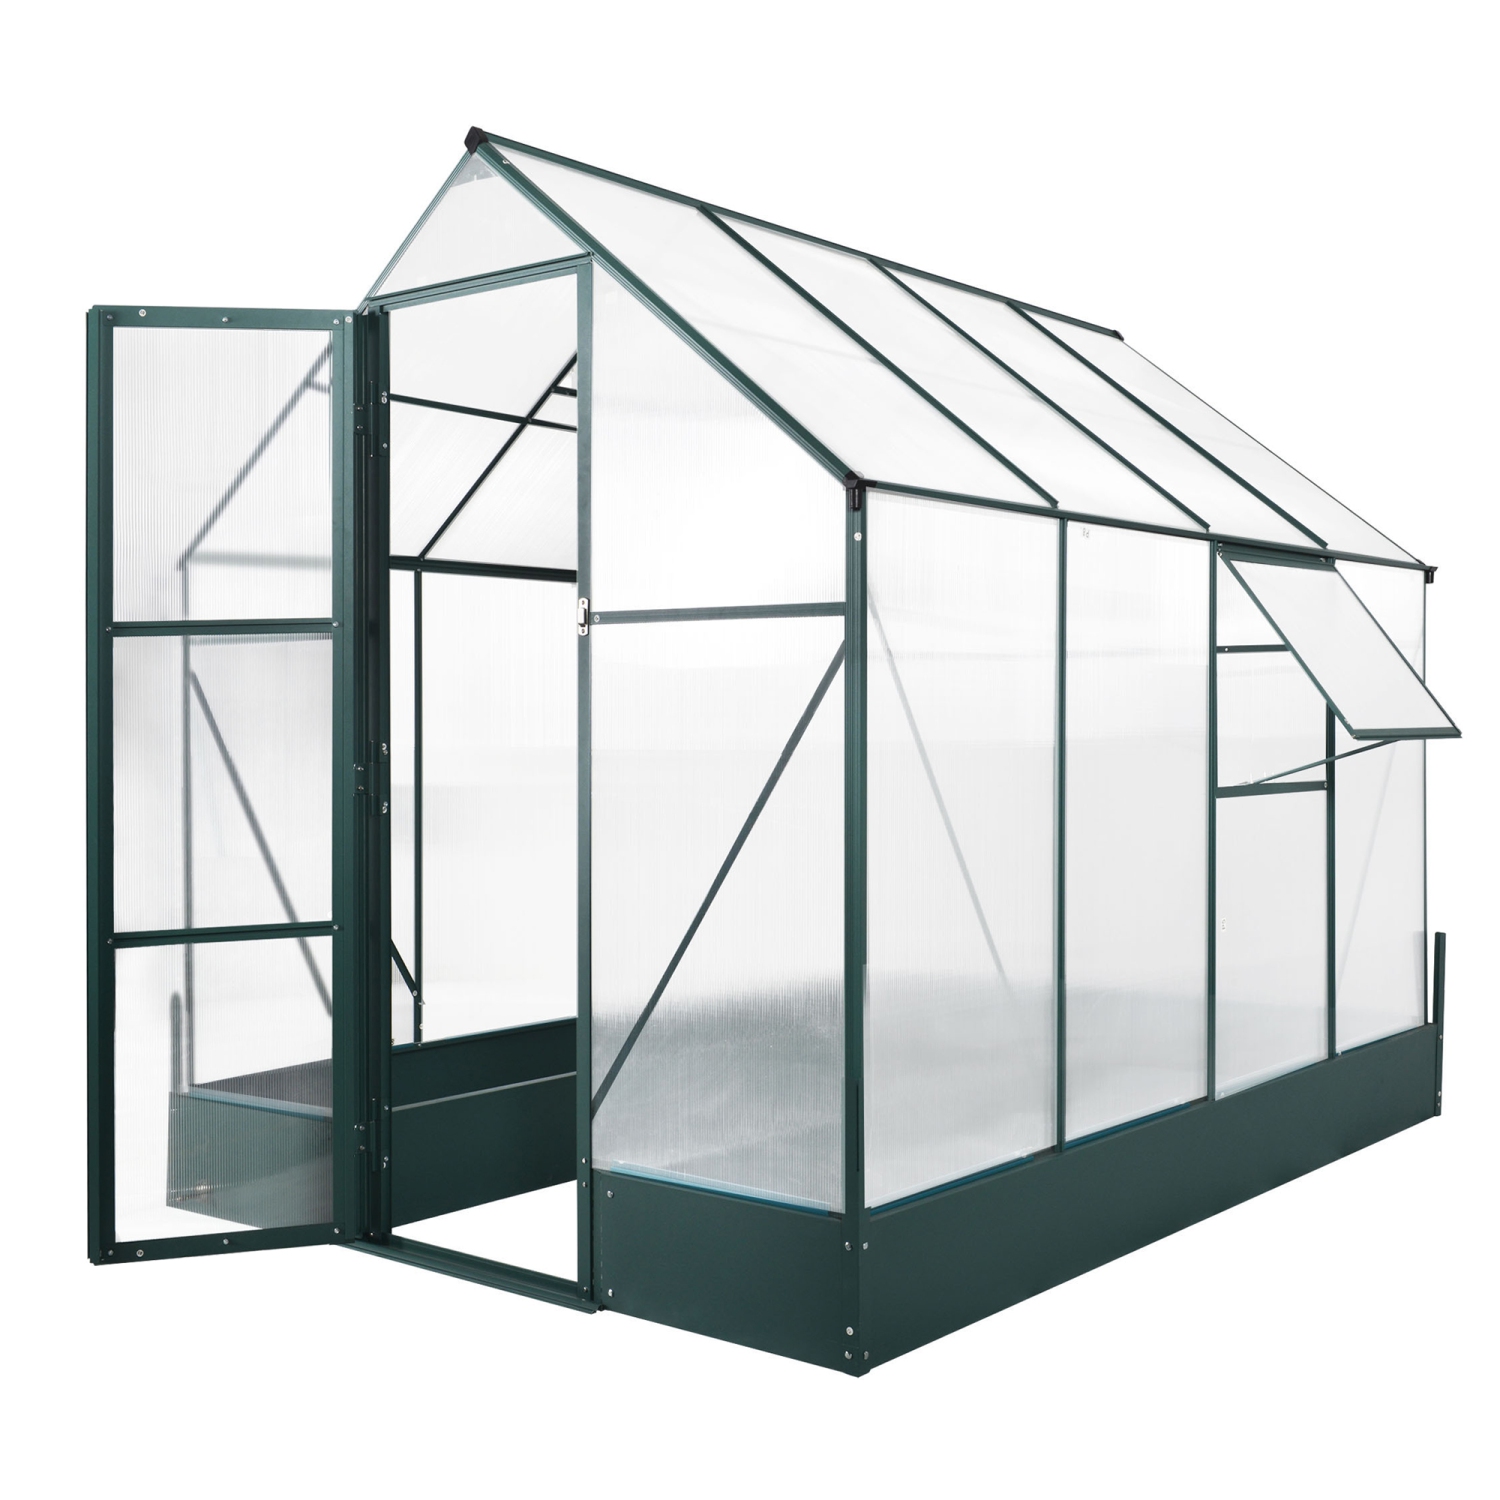 Outsunny 8.2' x 6.2' Upgraded Greenhouse with Temperature Controlled Window, Raised Garden Bed and Foundation, Walk-in Outdoor Plant Garden Green House with Aluminum Alloy Frame